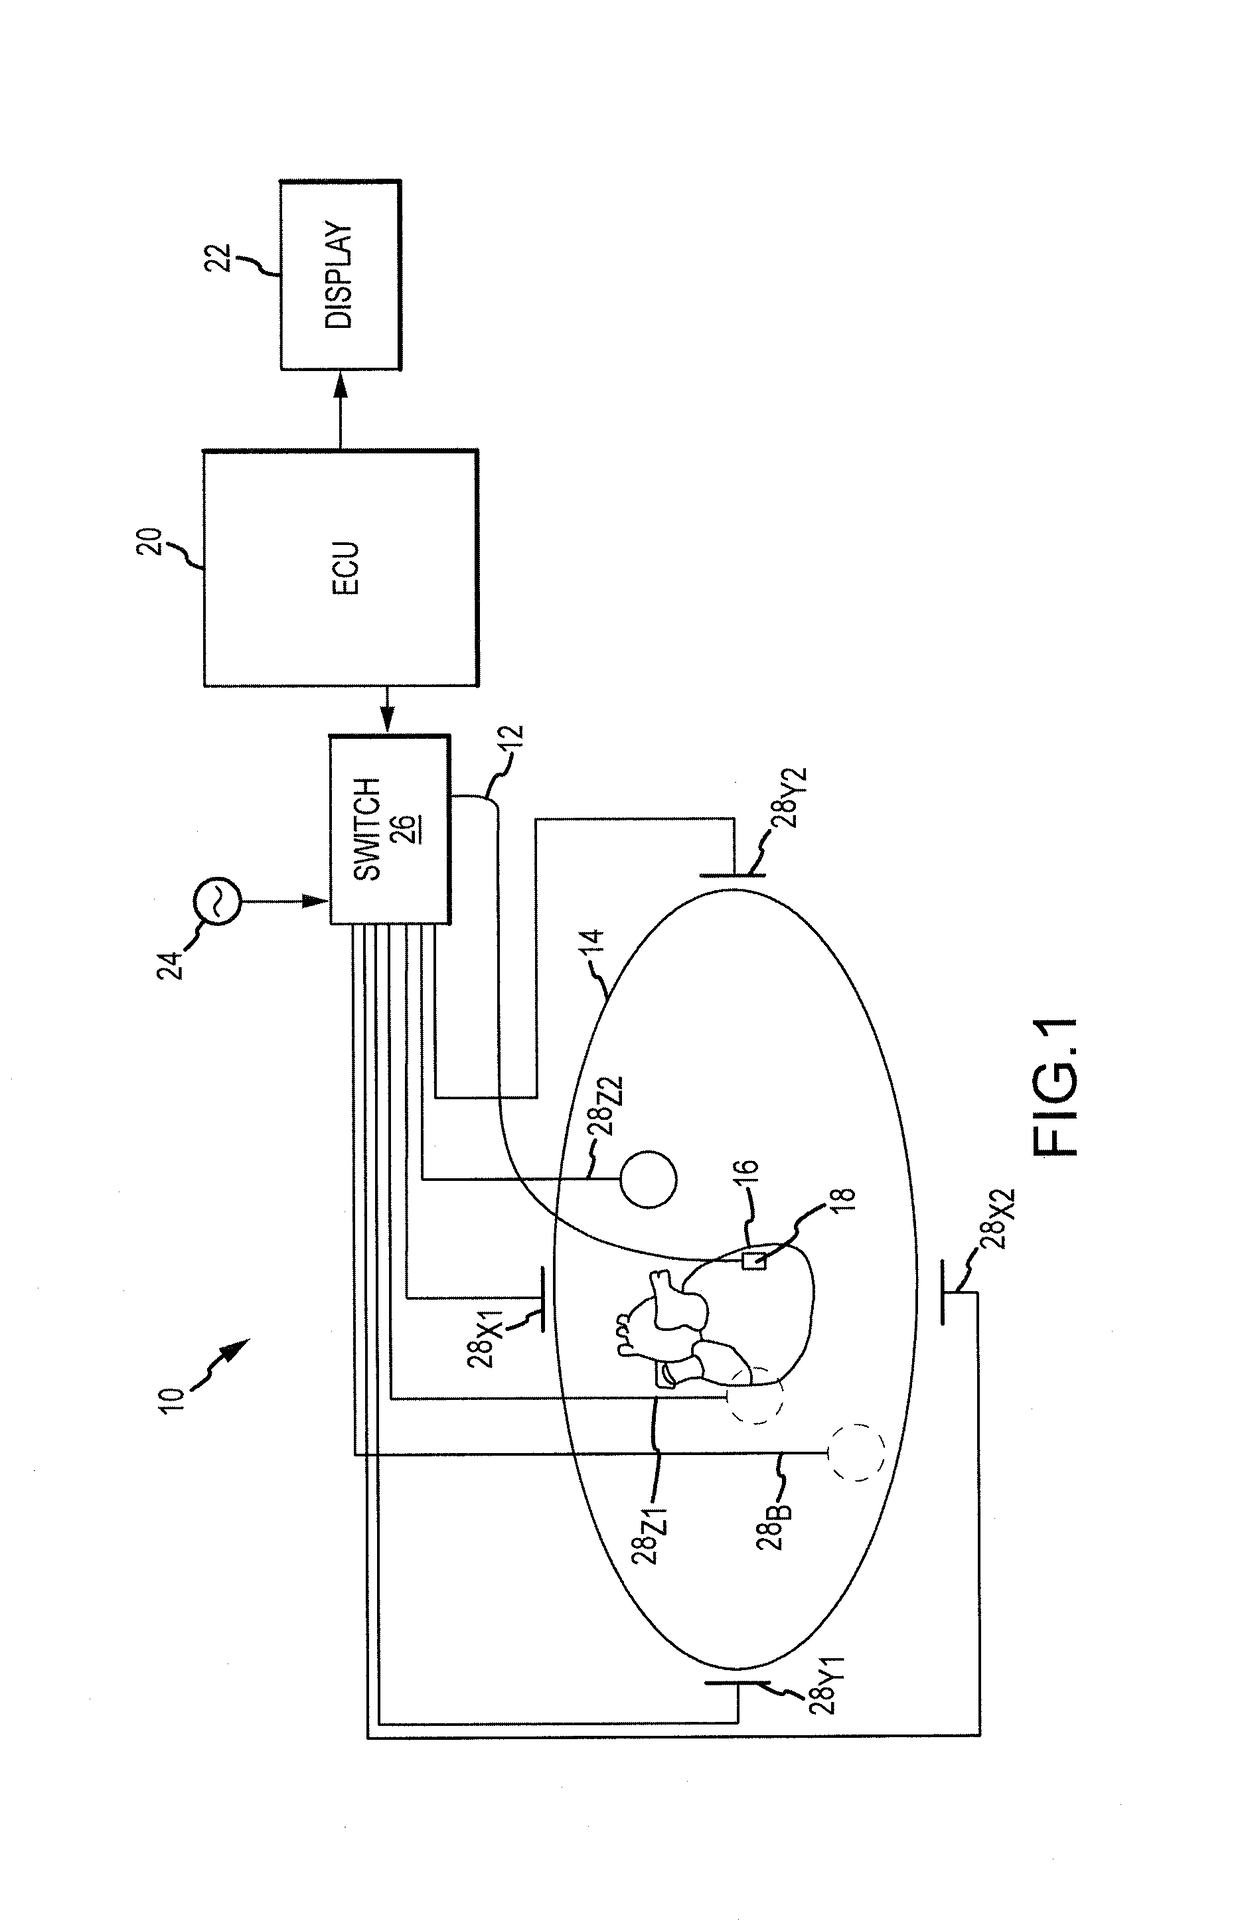 Scaling of electrical impedance-based navigation space using inter-electrode spacing